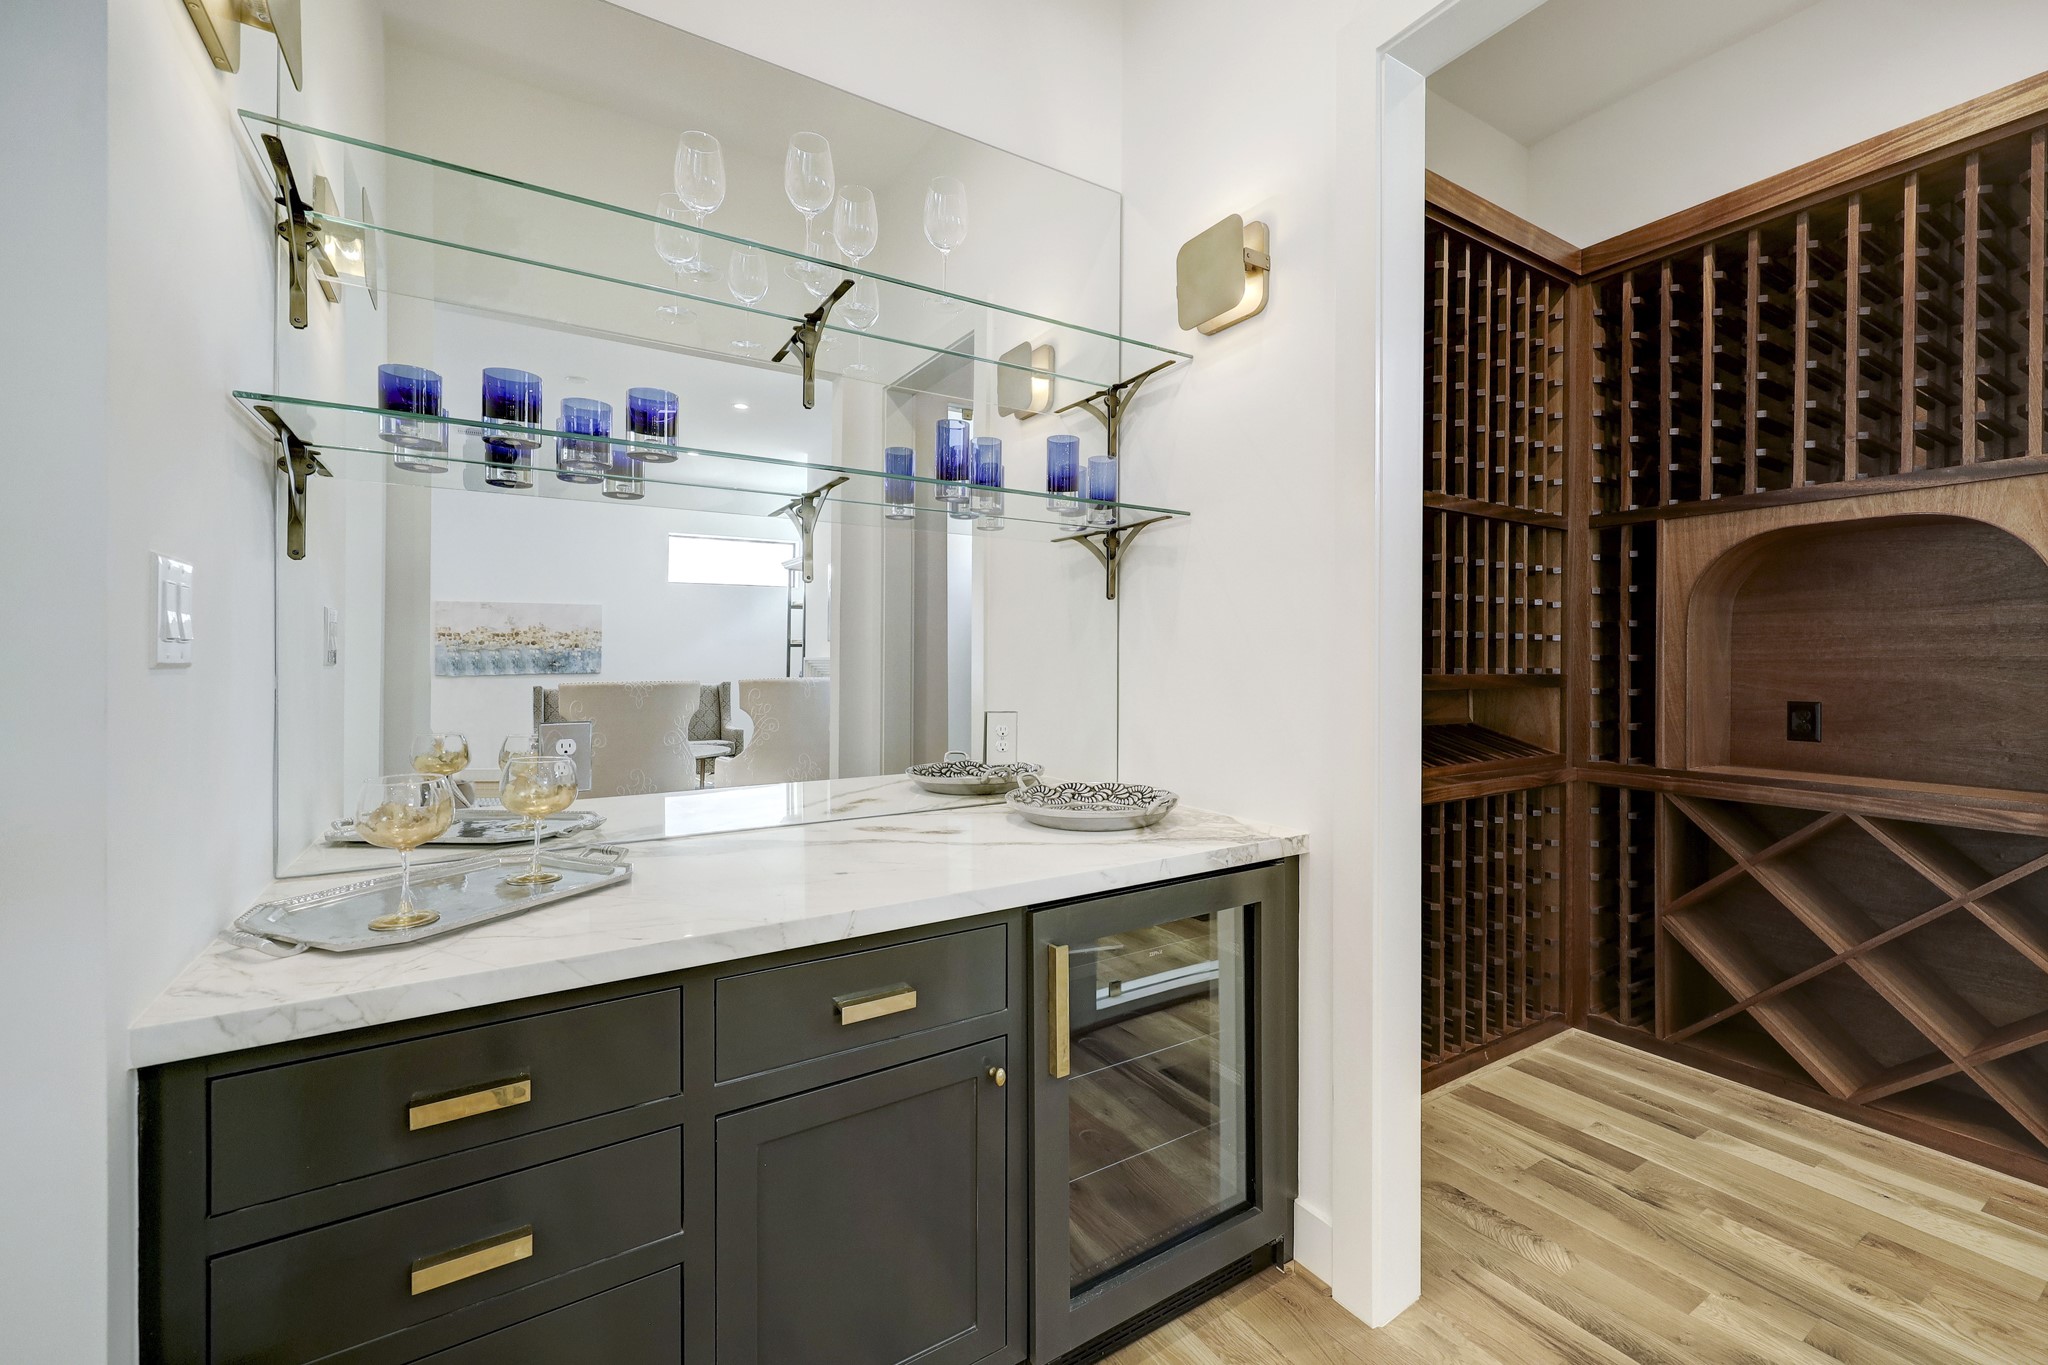 Dry bar and wine room off great room with beverage refrigerator. Custom-designed mahogany wine display and storage room with 200+ bottle capacity. Insulated separate HVAC zone control.